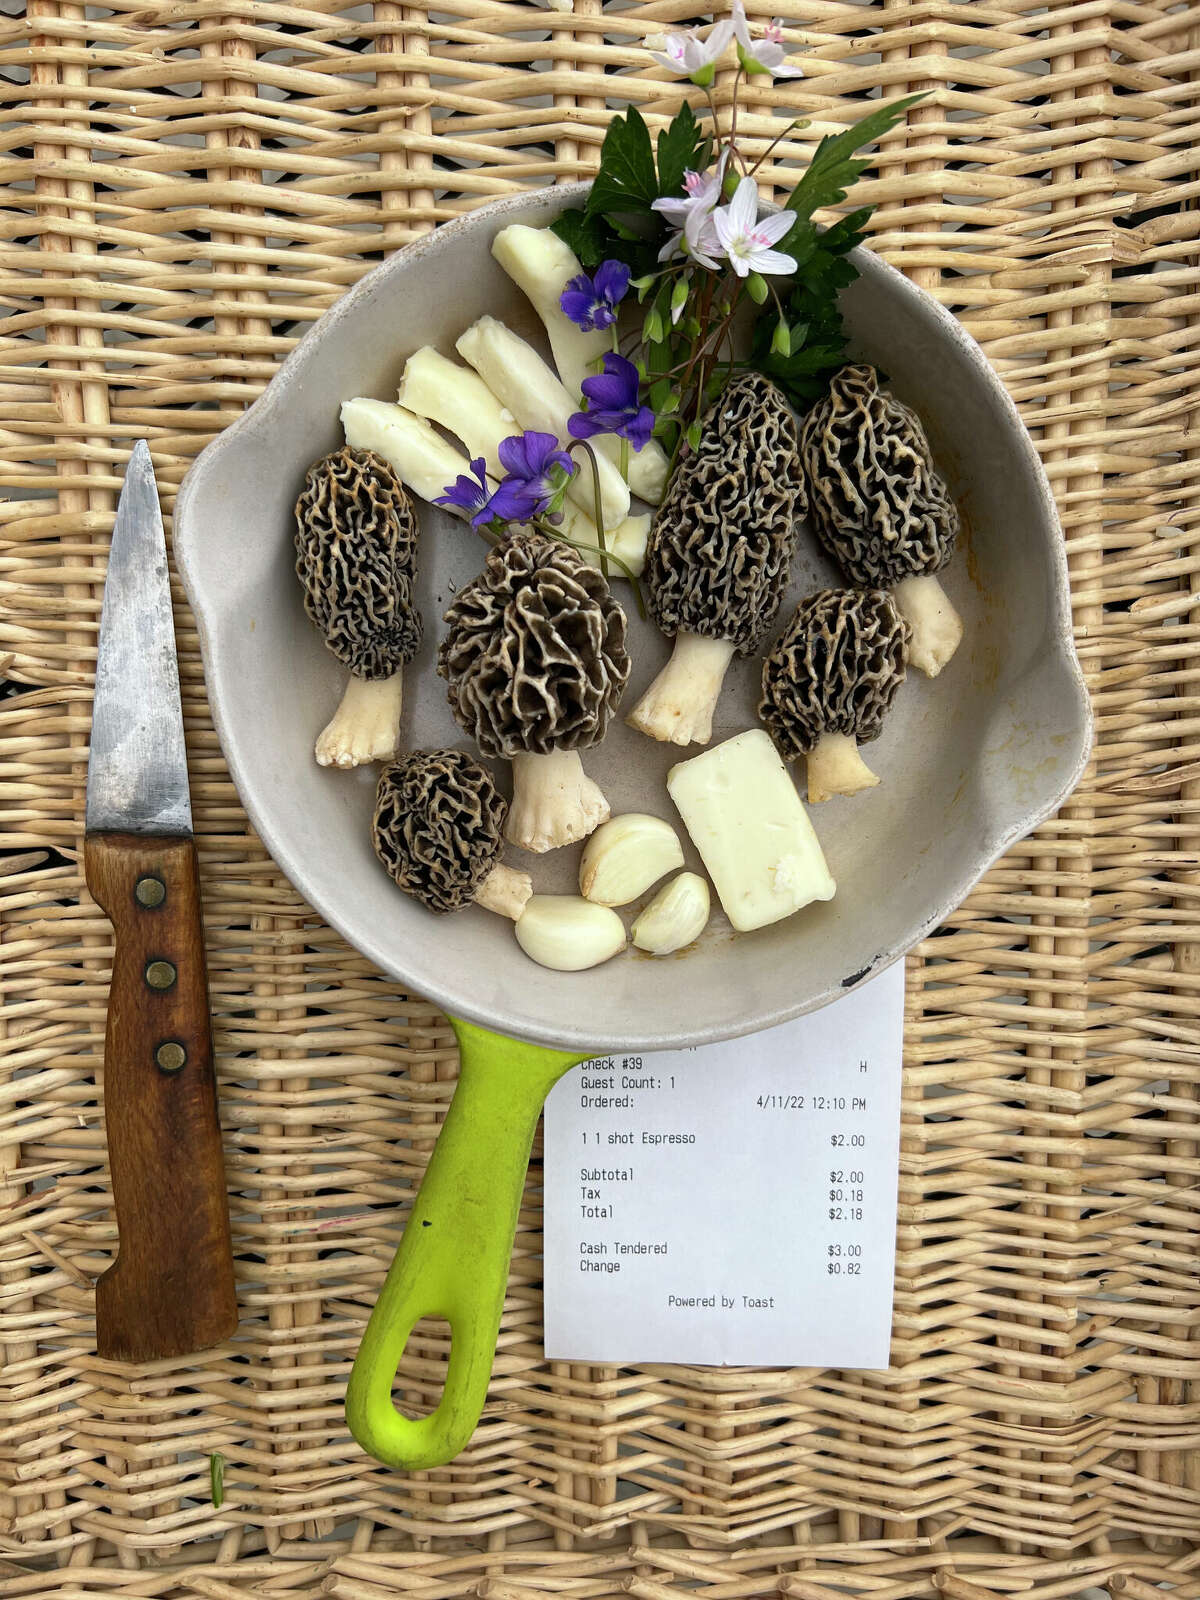 Common morels, known as "yellows," and found by Gary Vondrasek, of Edwardsville, sit in a skillet with garlic, fine cheeses, parsley and edible flowers, which are ingredients for a scrambled egg morel and garlic brunch recipe. Vondrasek's French knife sits beside the skillet. This morel species is one of the most readily recognized of all the edible mushrooms and highly sought.